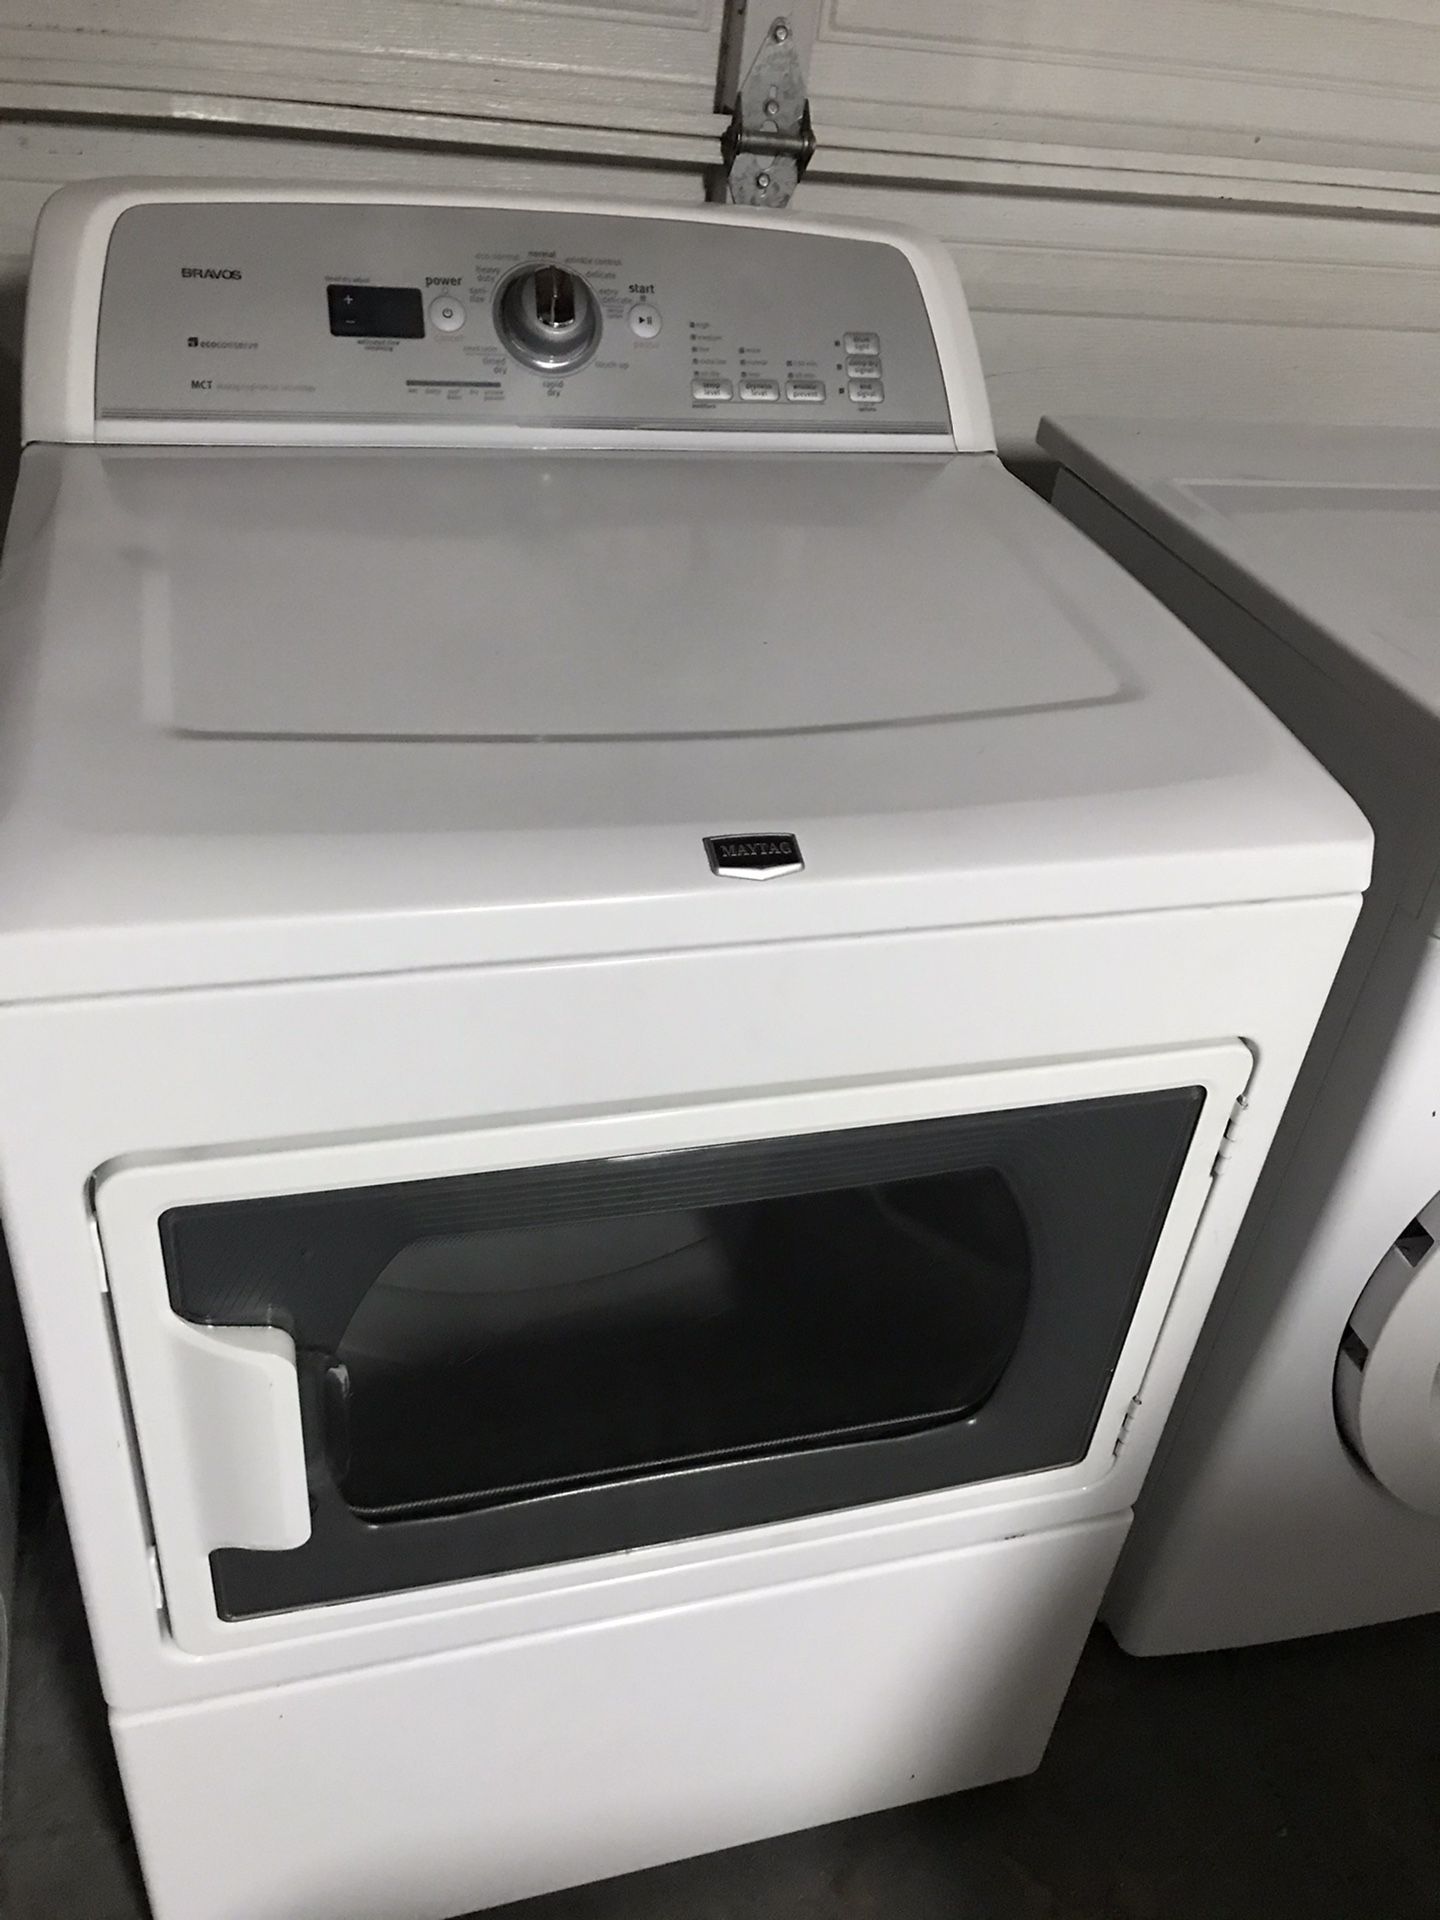 Maytag Bravos Electric dryer. Fully functional. Free delivery and installation